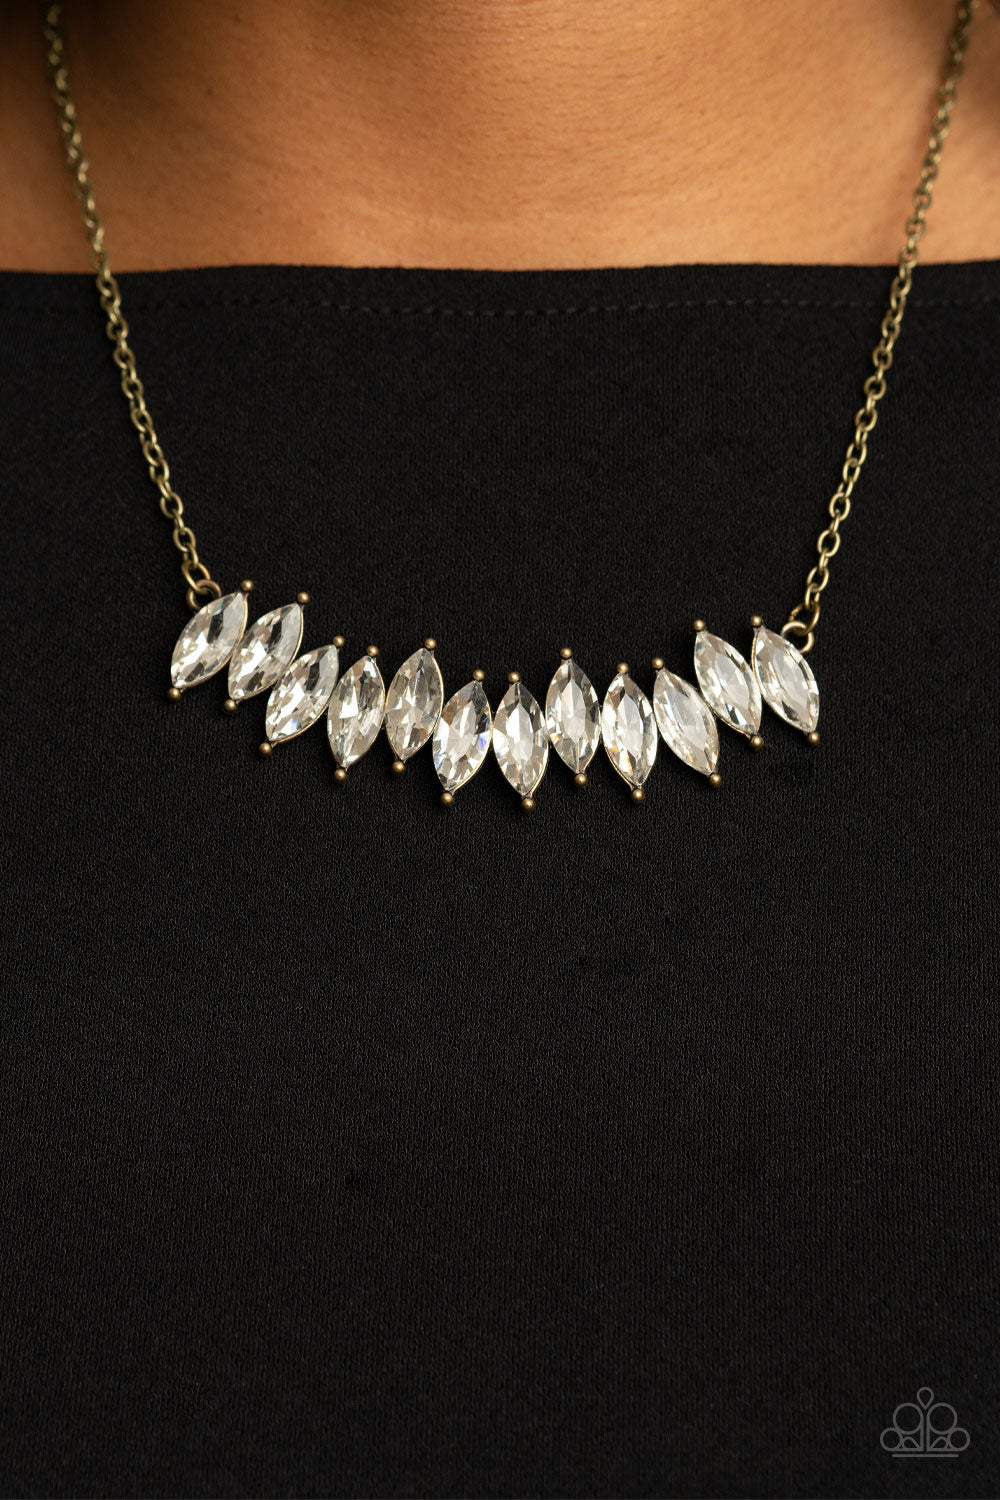 PRE-ORDER - Paparazzi Icy Intensity - Brass - Necklace & Earrings - $5 Jewelry with Ashley Swint